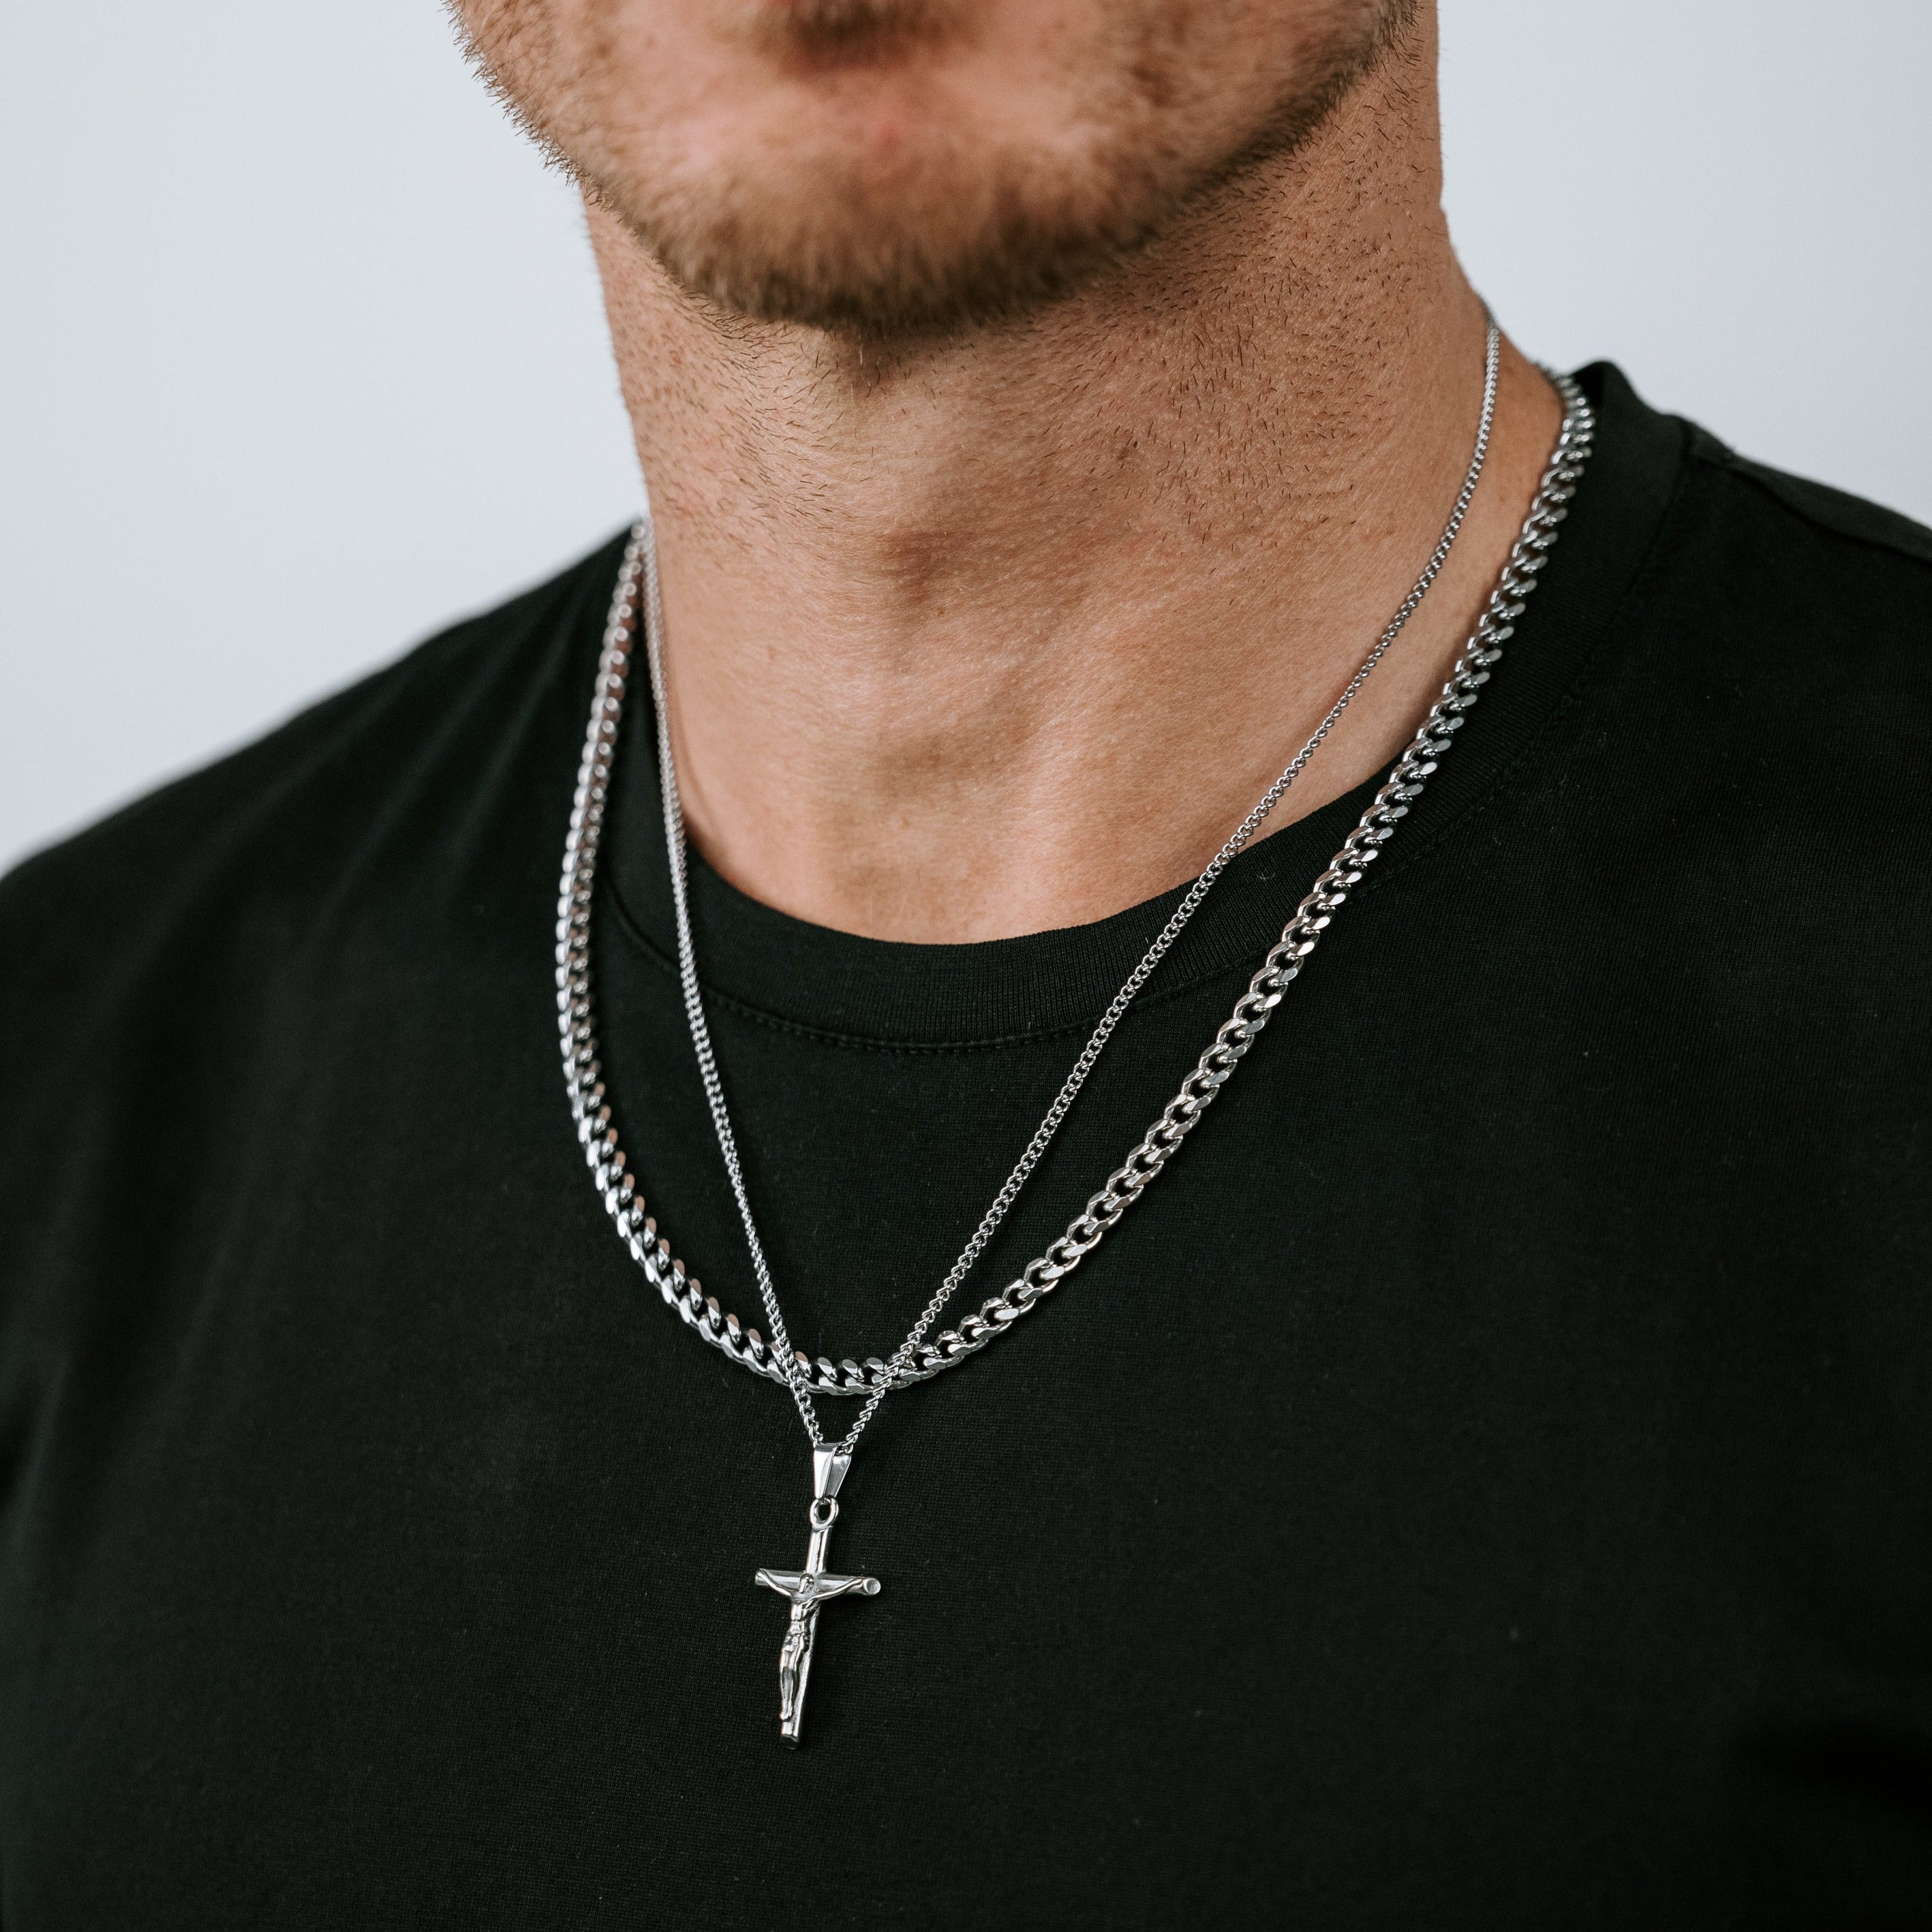 Men's Stainless Steel Cuban Chain and Crucifix Pendant